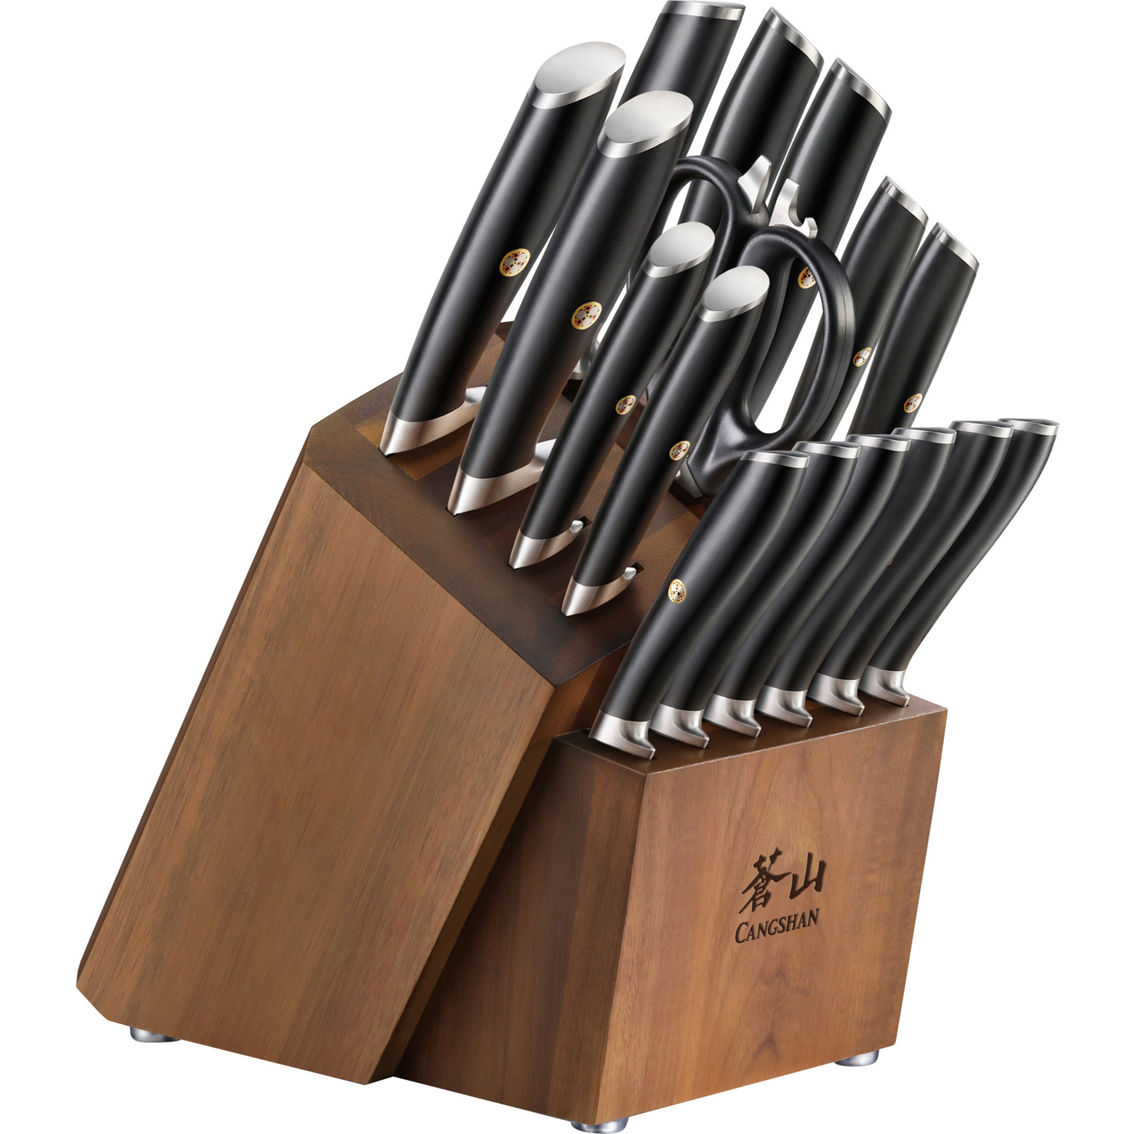 Cangshan Cutlery L Series Black Forged Block Set Acacia 17 pc. - Image 3 of 6